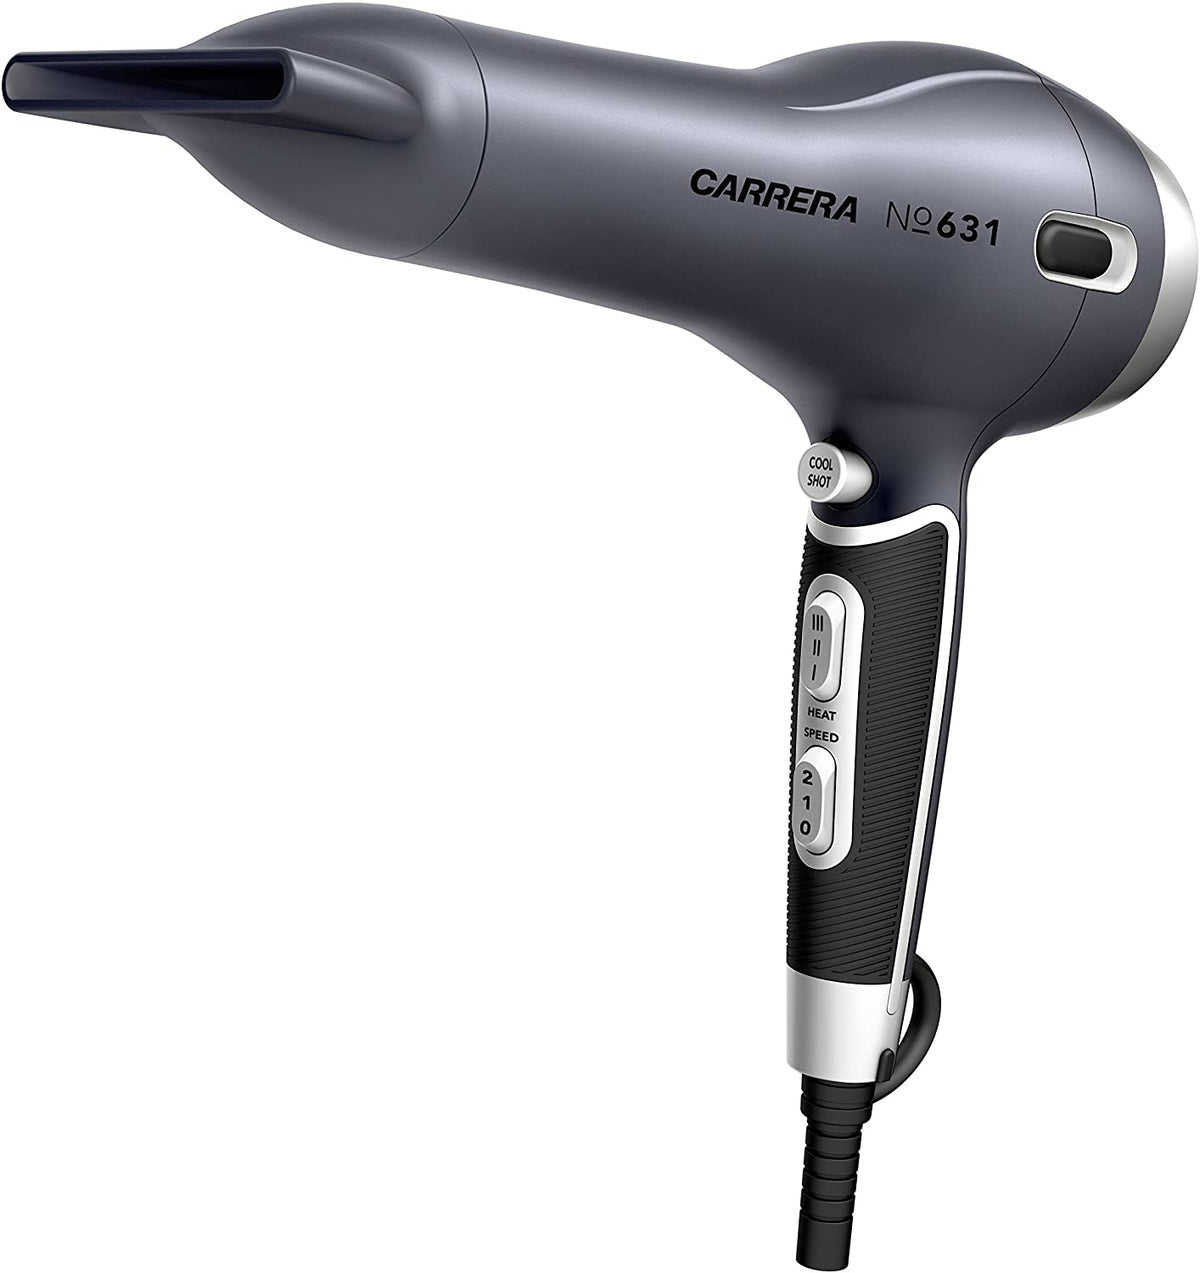 Carrera,Professional Hair Dryers for Men & Women, Styling Nozzle-Diffuser, Blow Dry, Hot-Cold Air, NO631